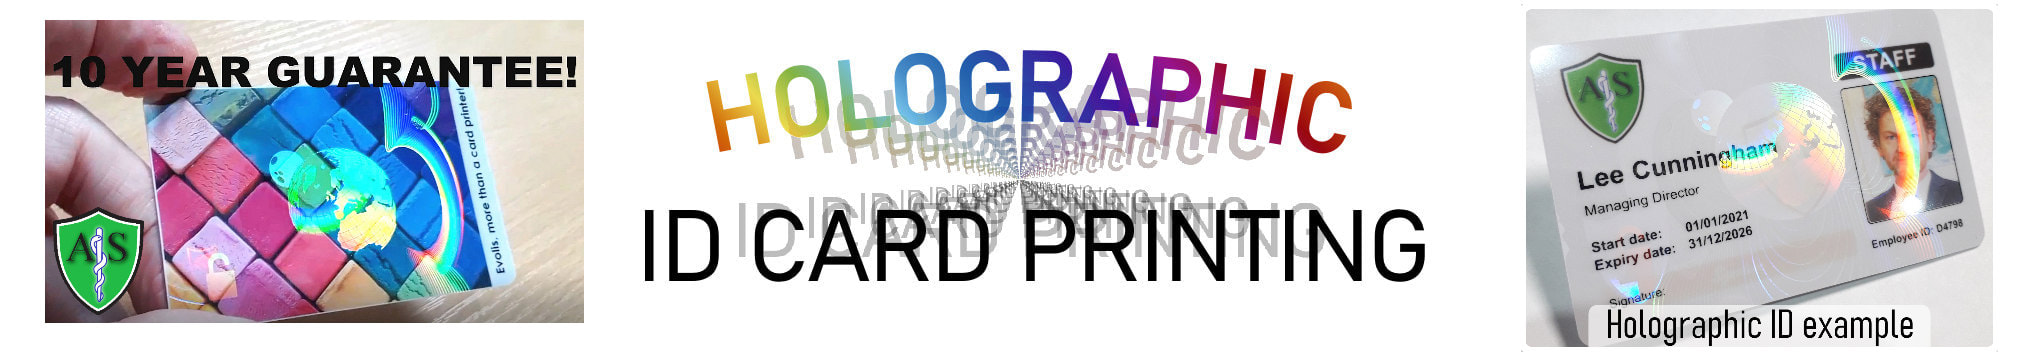 Portsmouth holographic ID card print service. Employee Identity cards with hologram or holograph security mark.